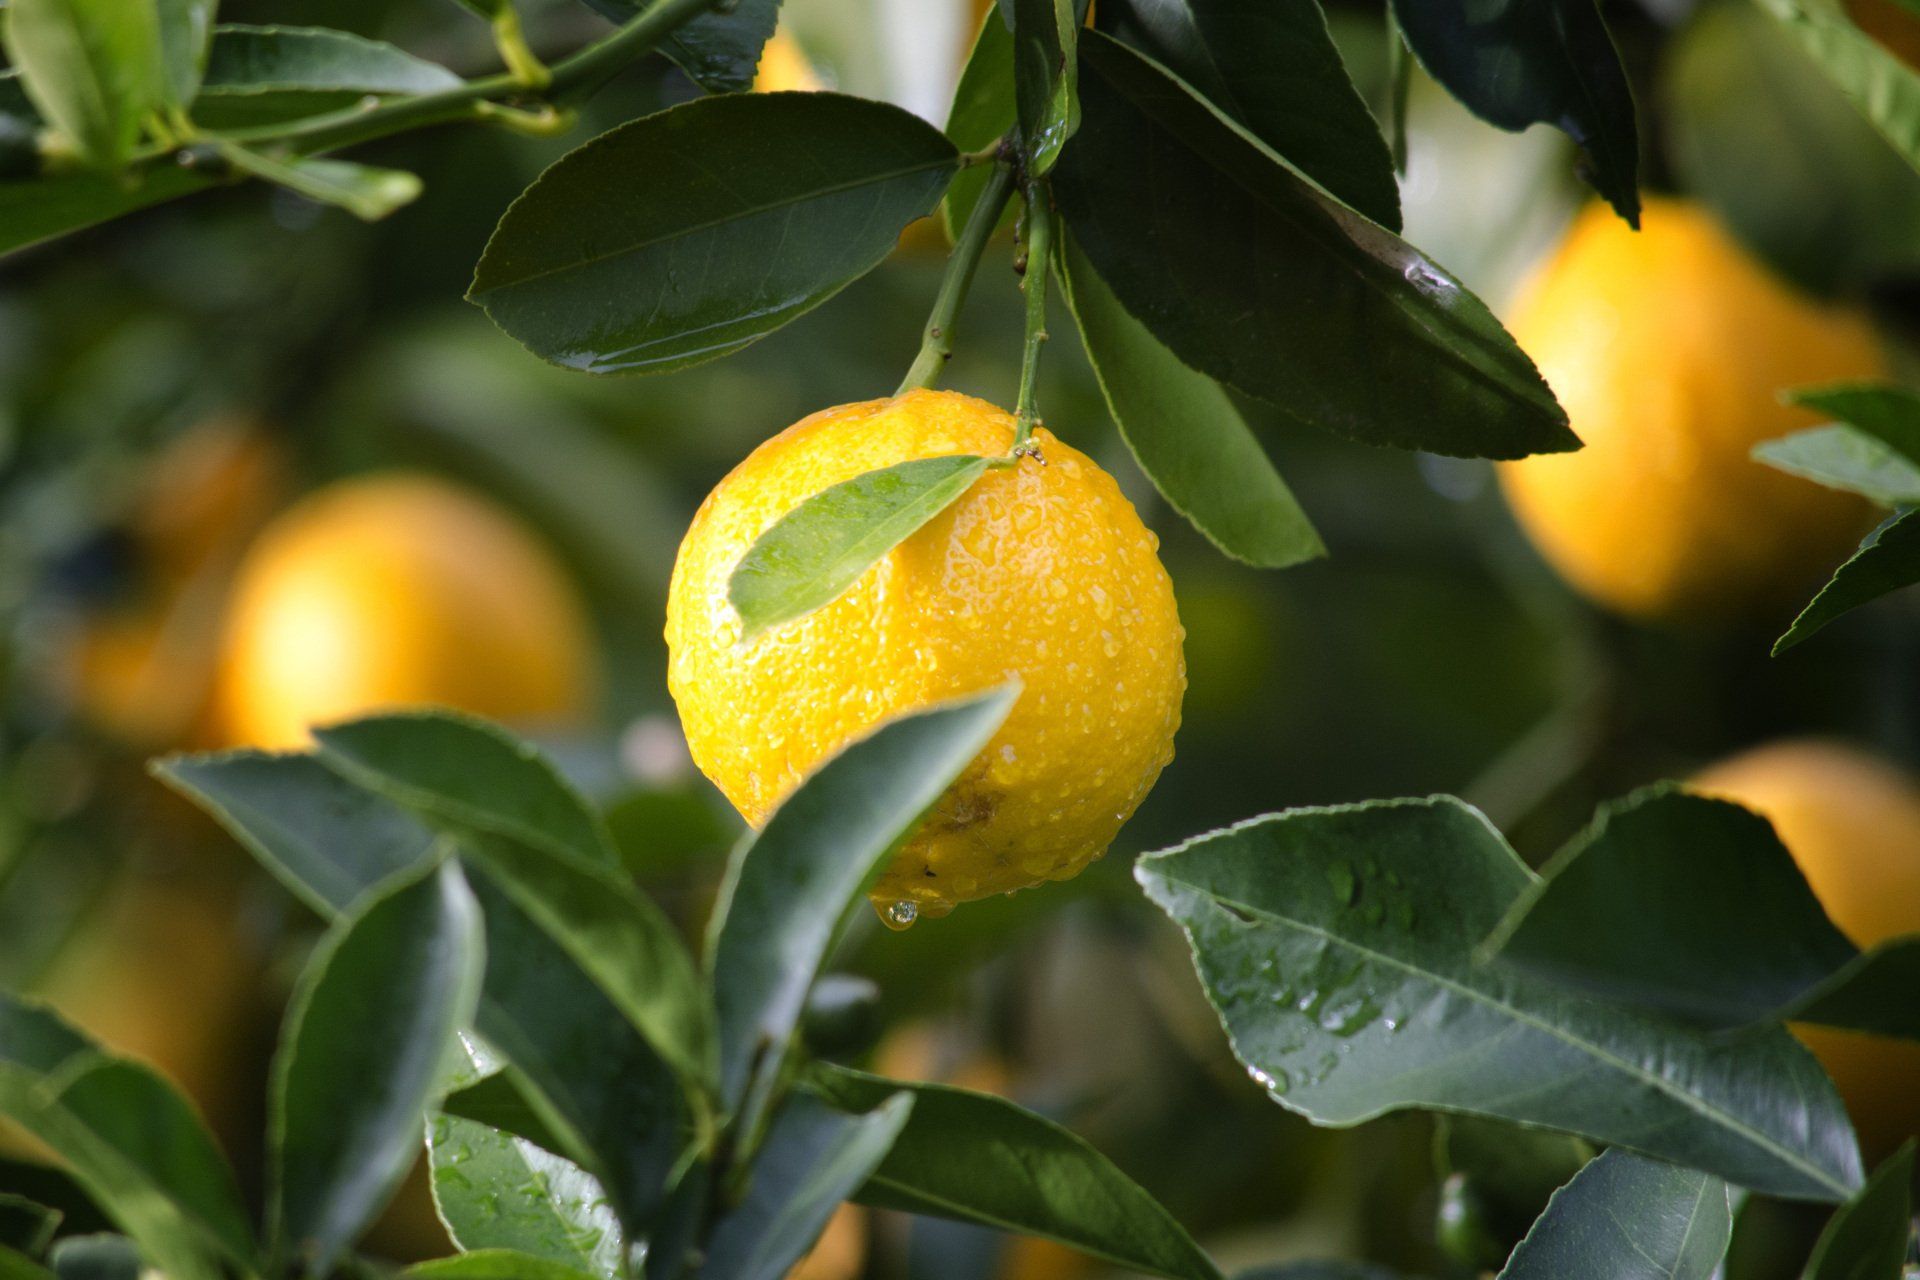 a close up of a lemon hanging from a tree